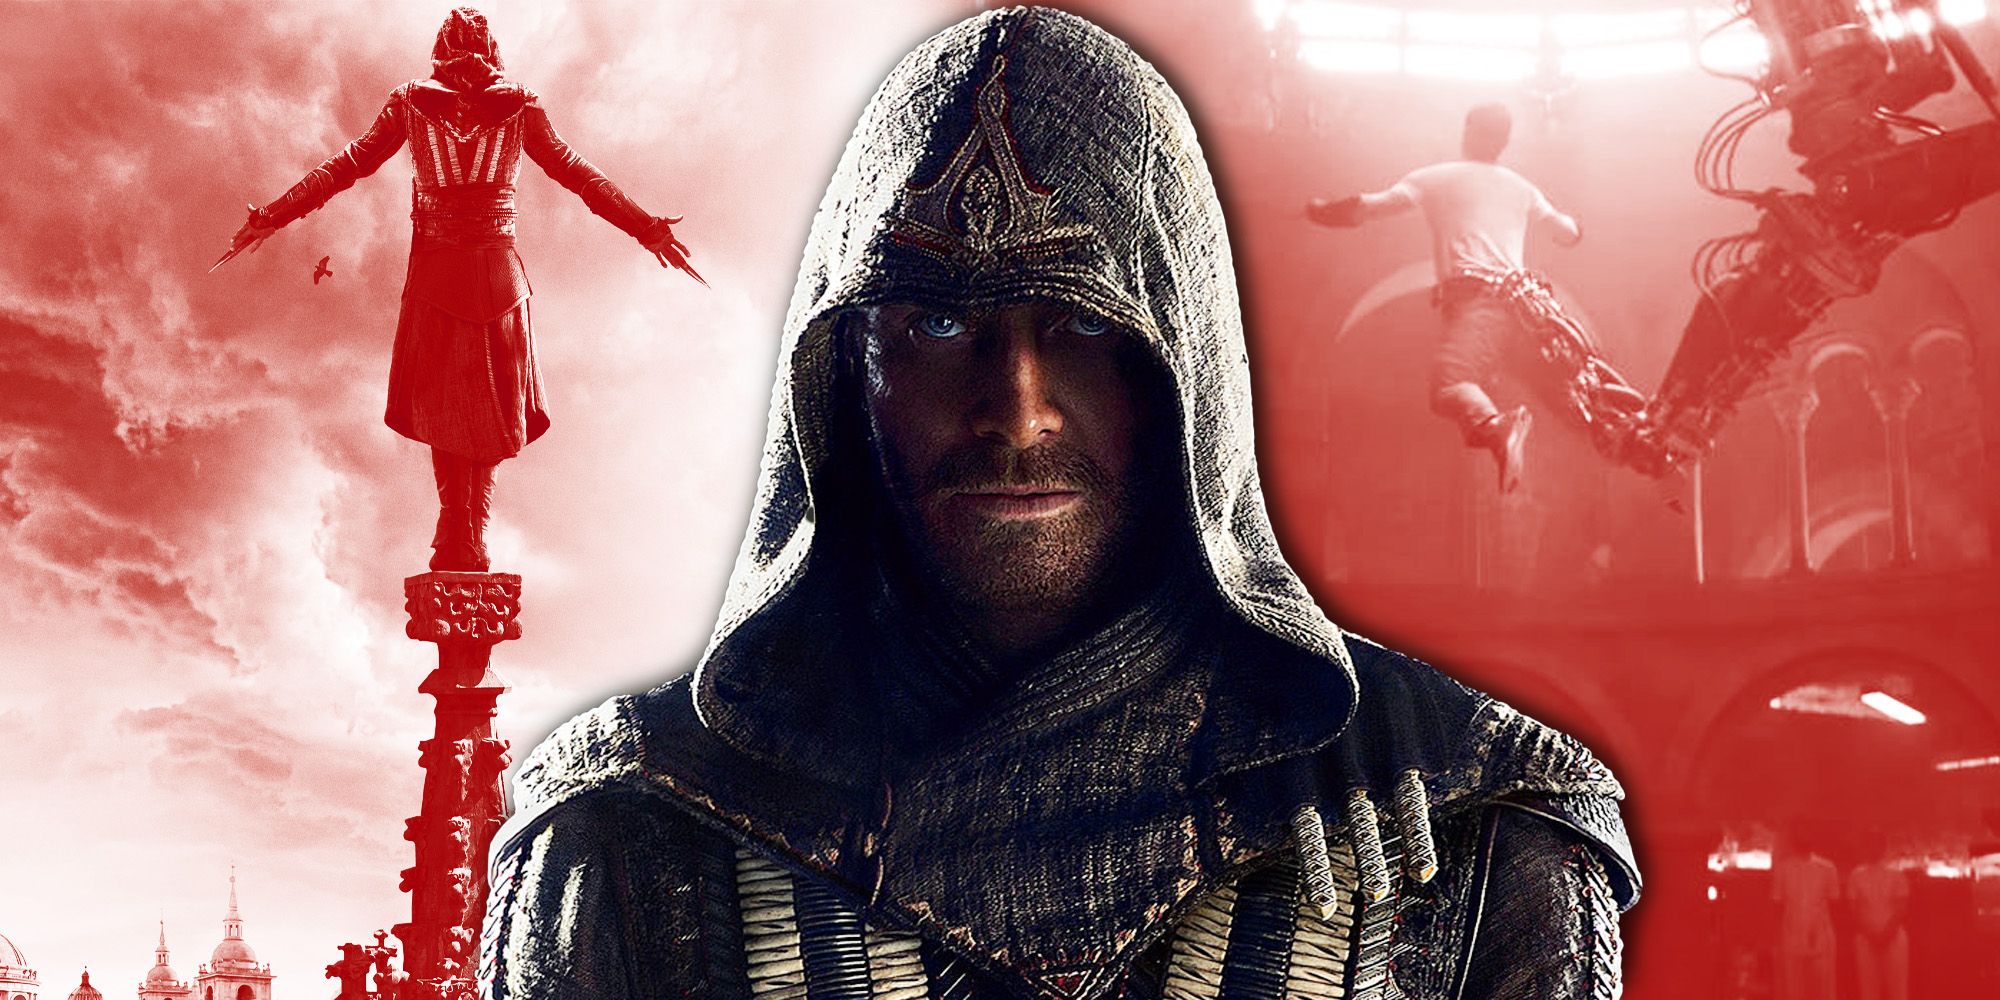 Assassin's Creed movie to be re-written - GameSpot